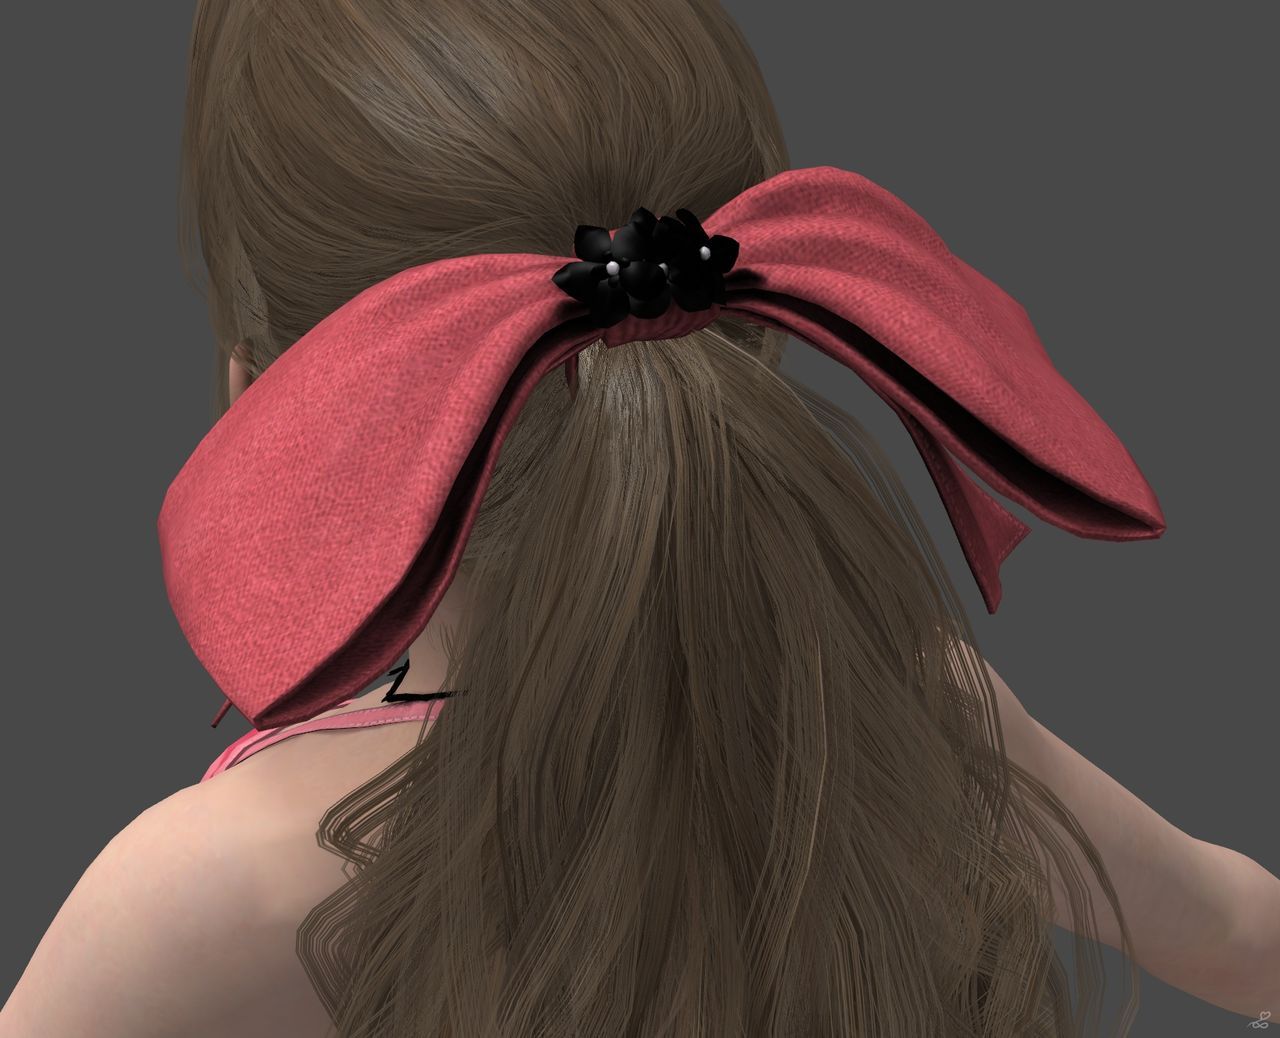 [J.A.] FF7 Remake | Aerith Reference 14